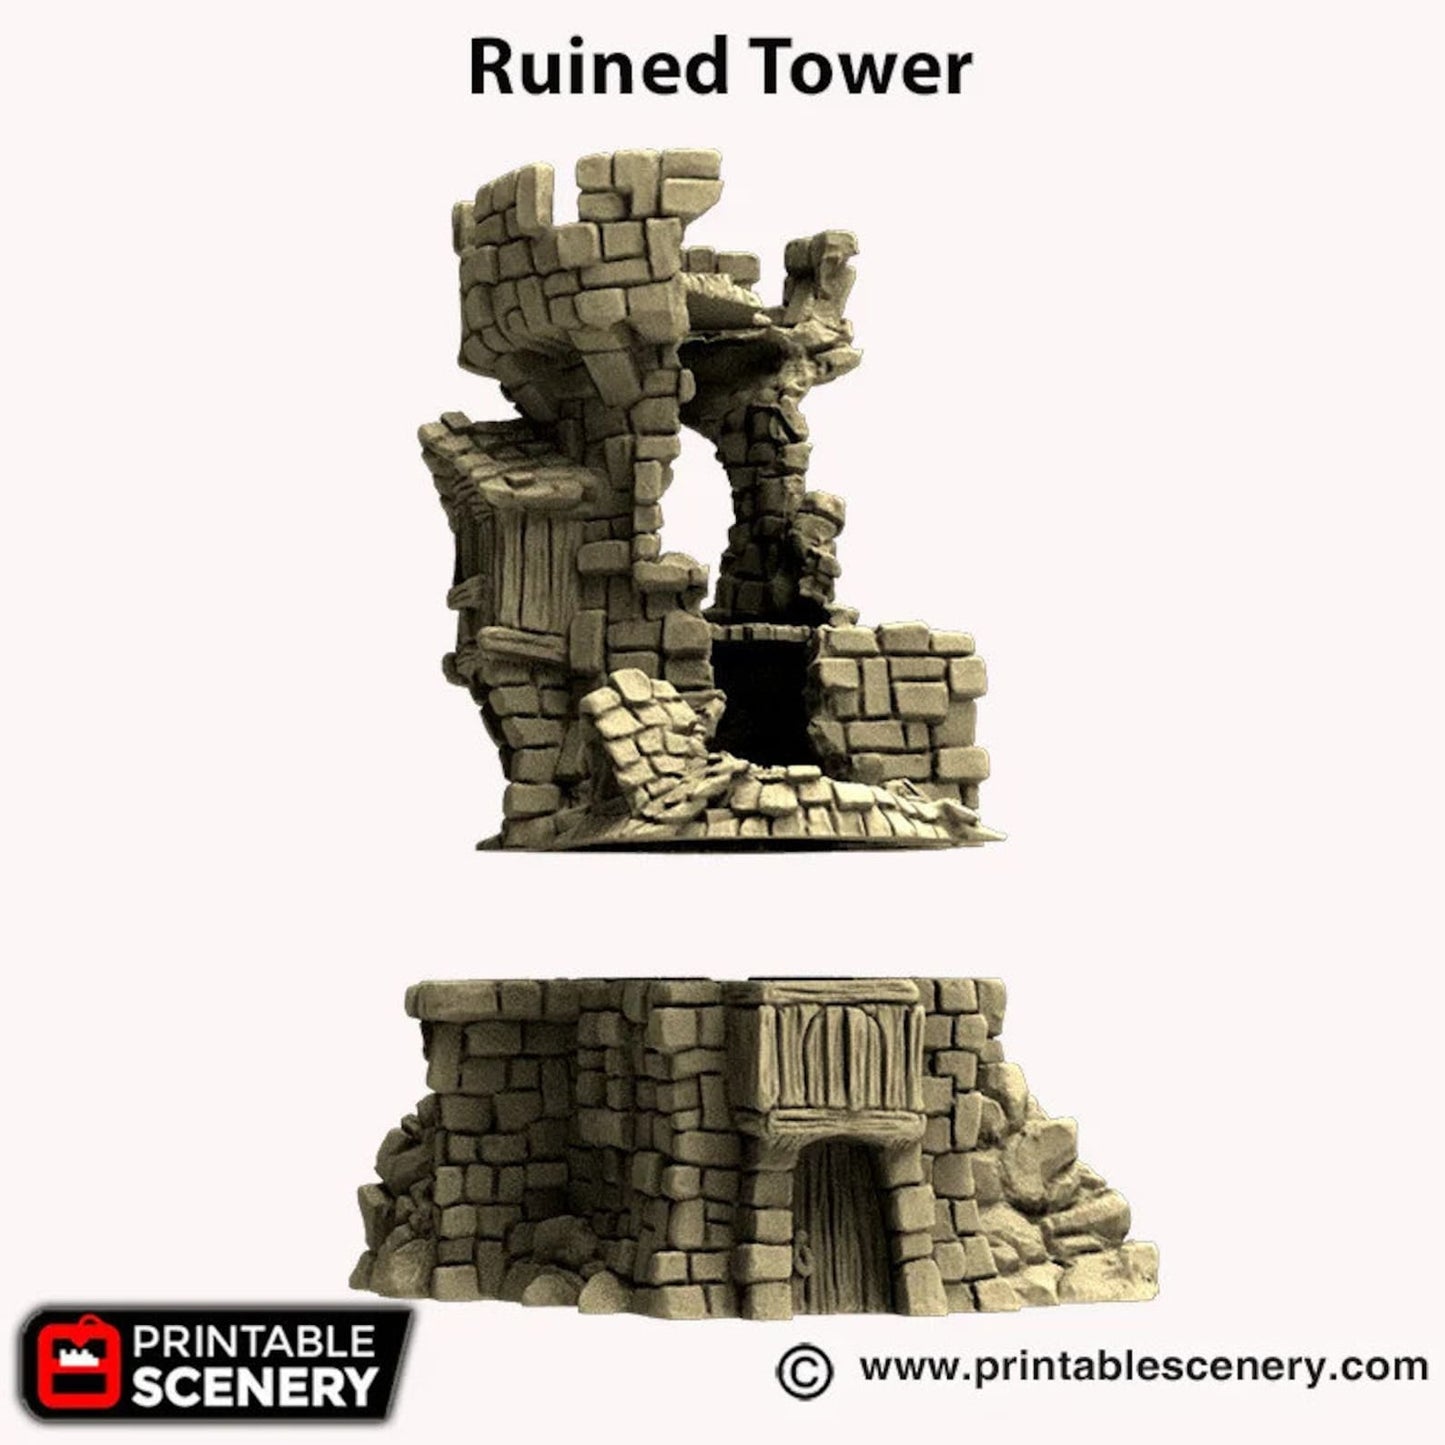 Hagglethorn Ruined Tower from Hagglethorn Hollow Printable Scenery 15mm 20mm 28mm 32mm Terrain D&D DnD Pathfinder Garden Tabletop Gaming, Role-playing, RPG, D&D